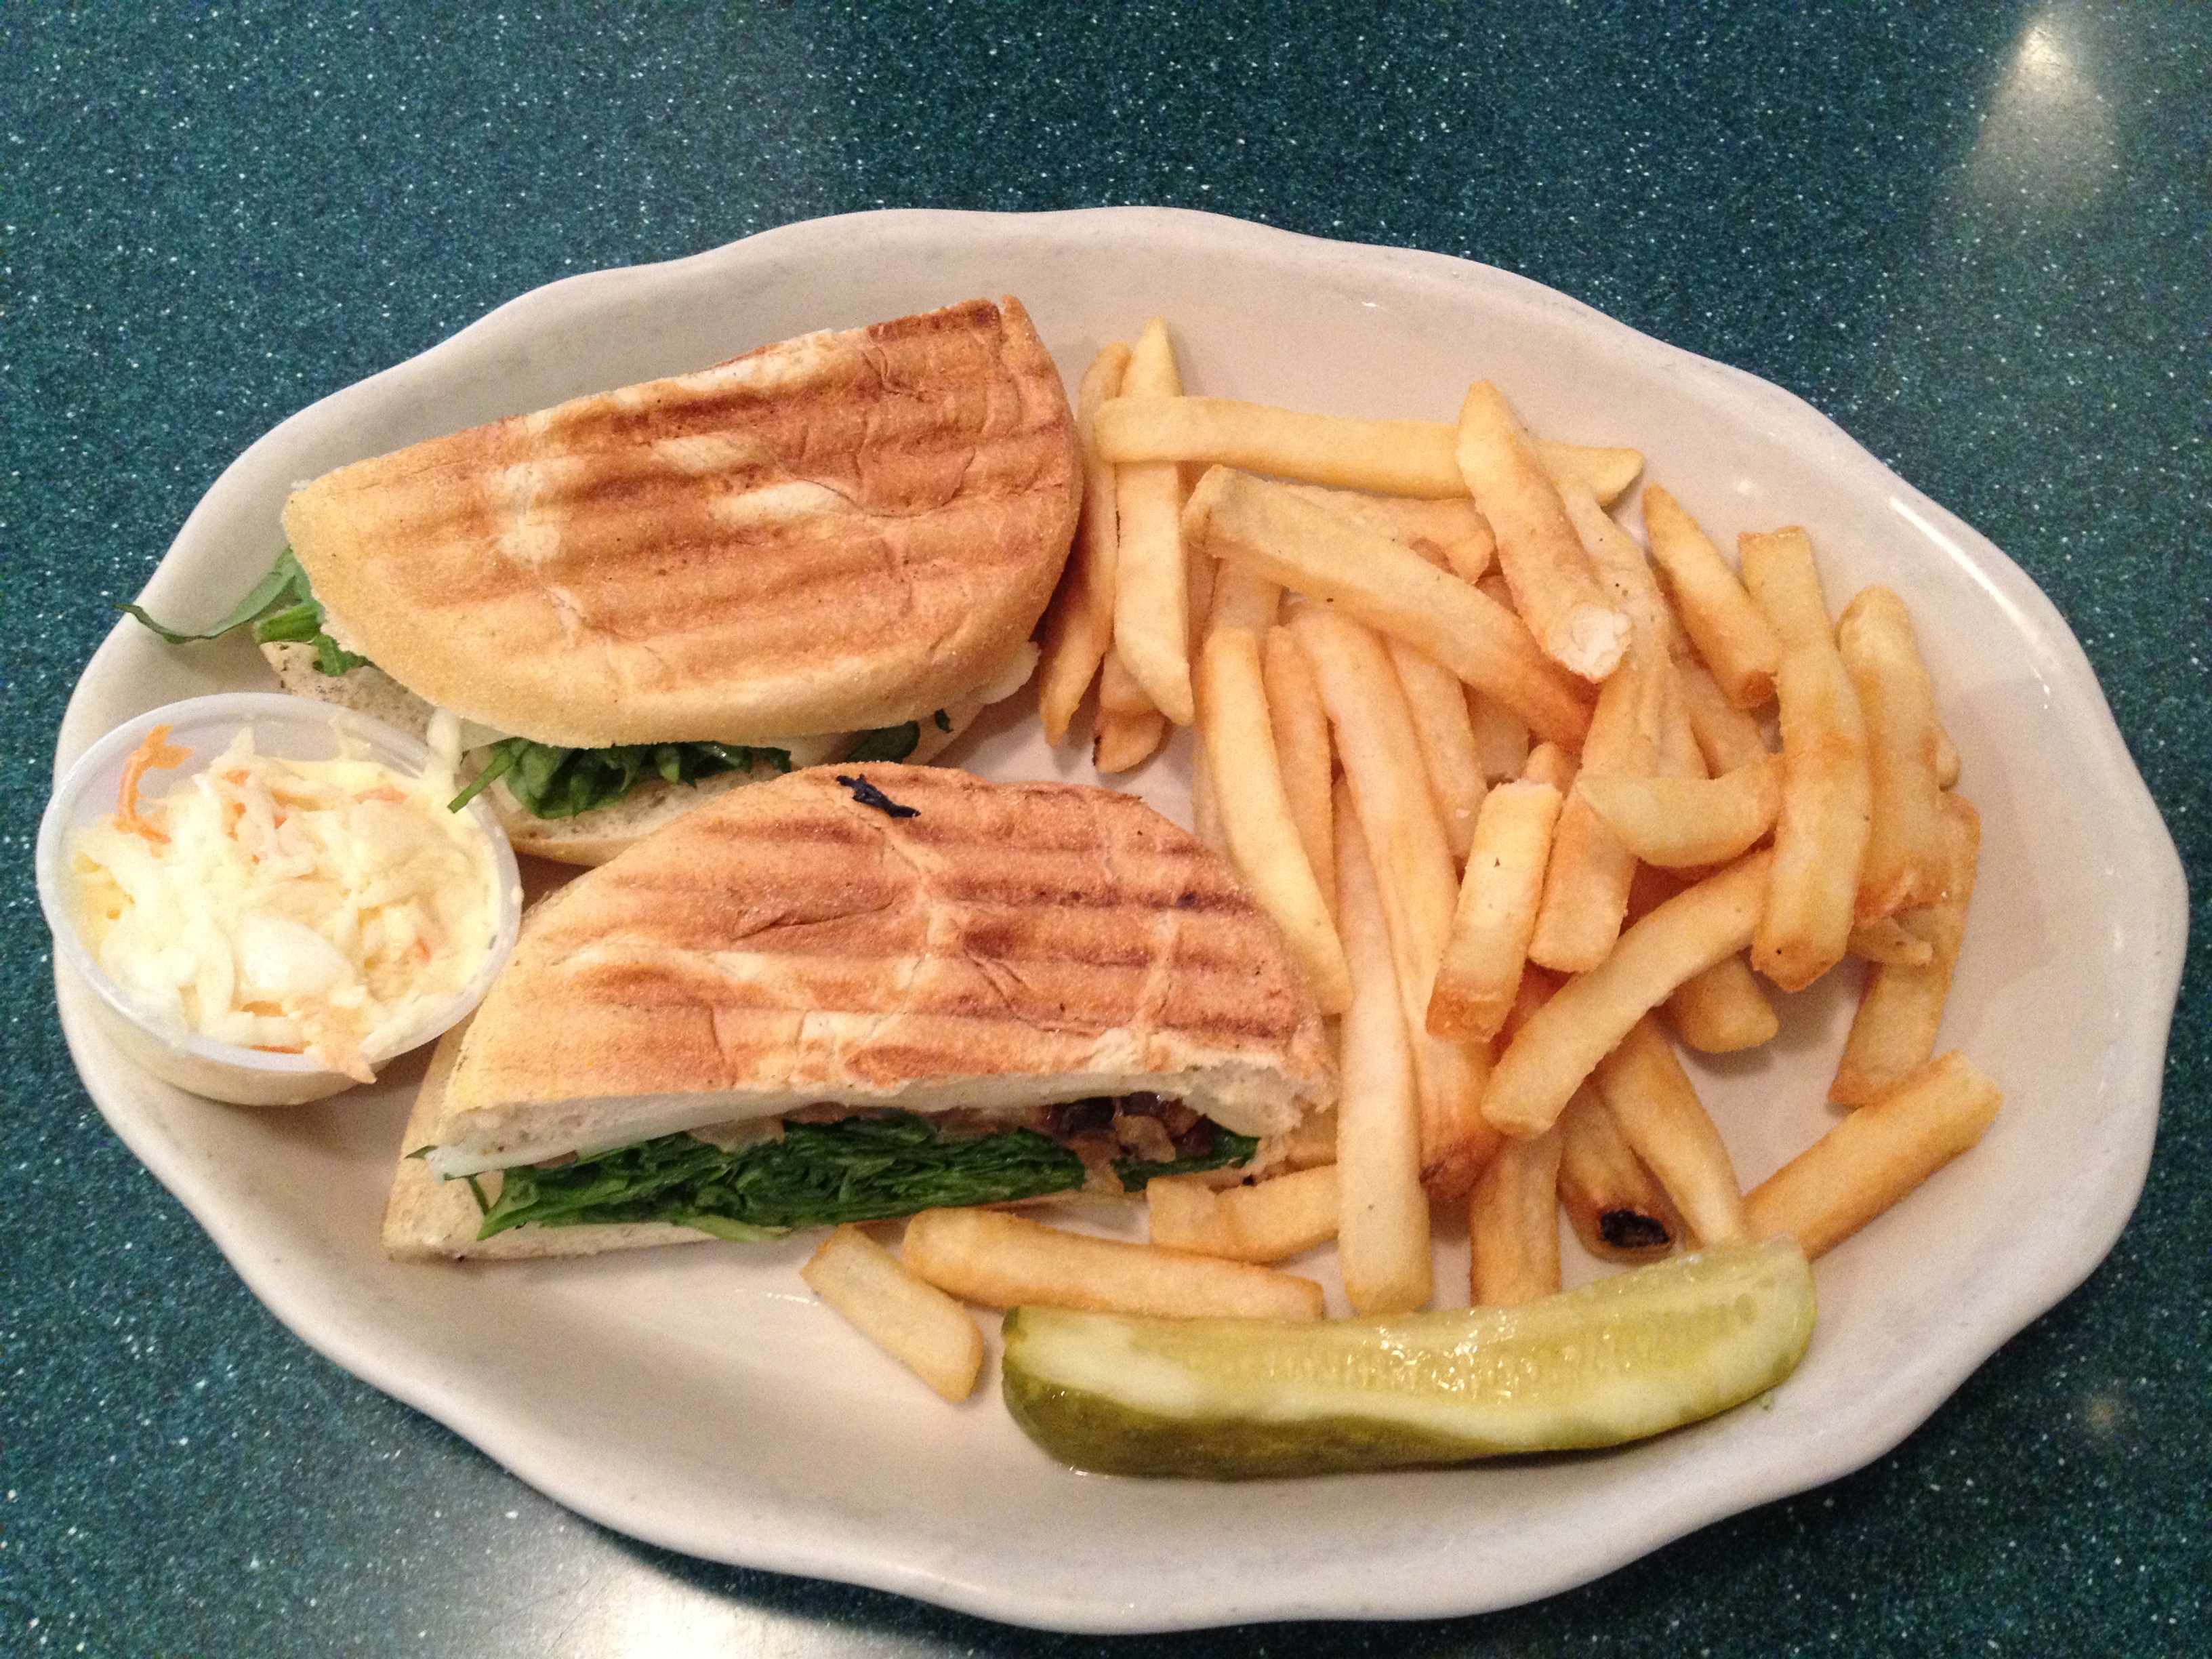 Veggie Panini with a side of fries